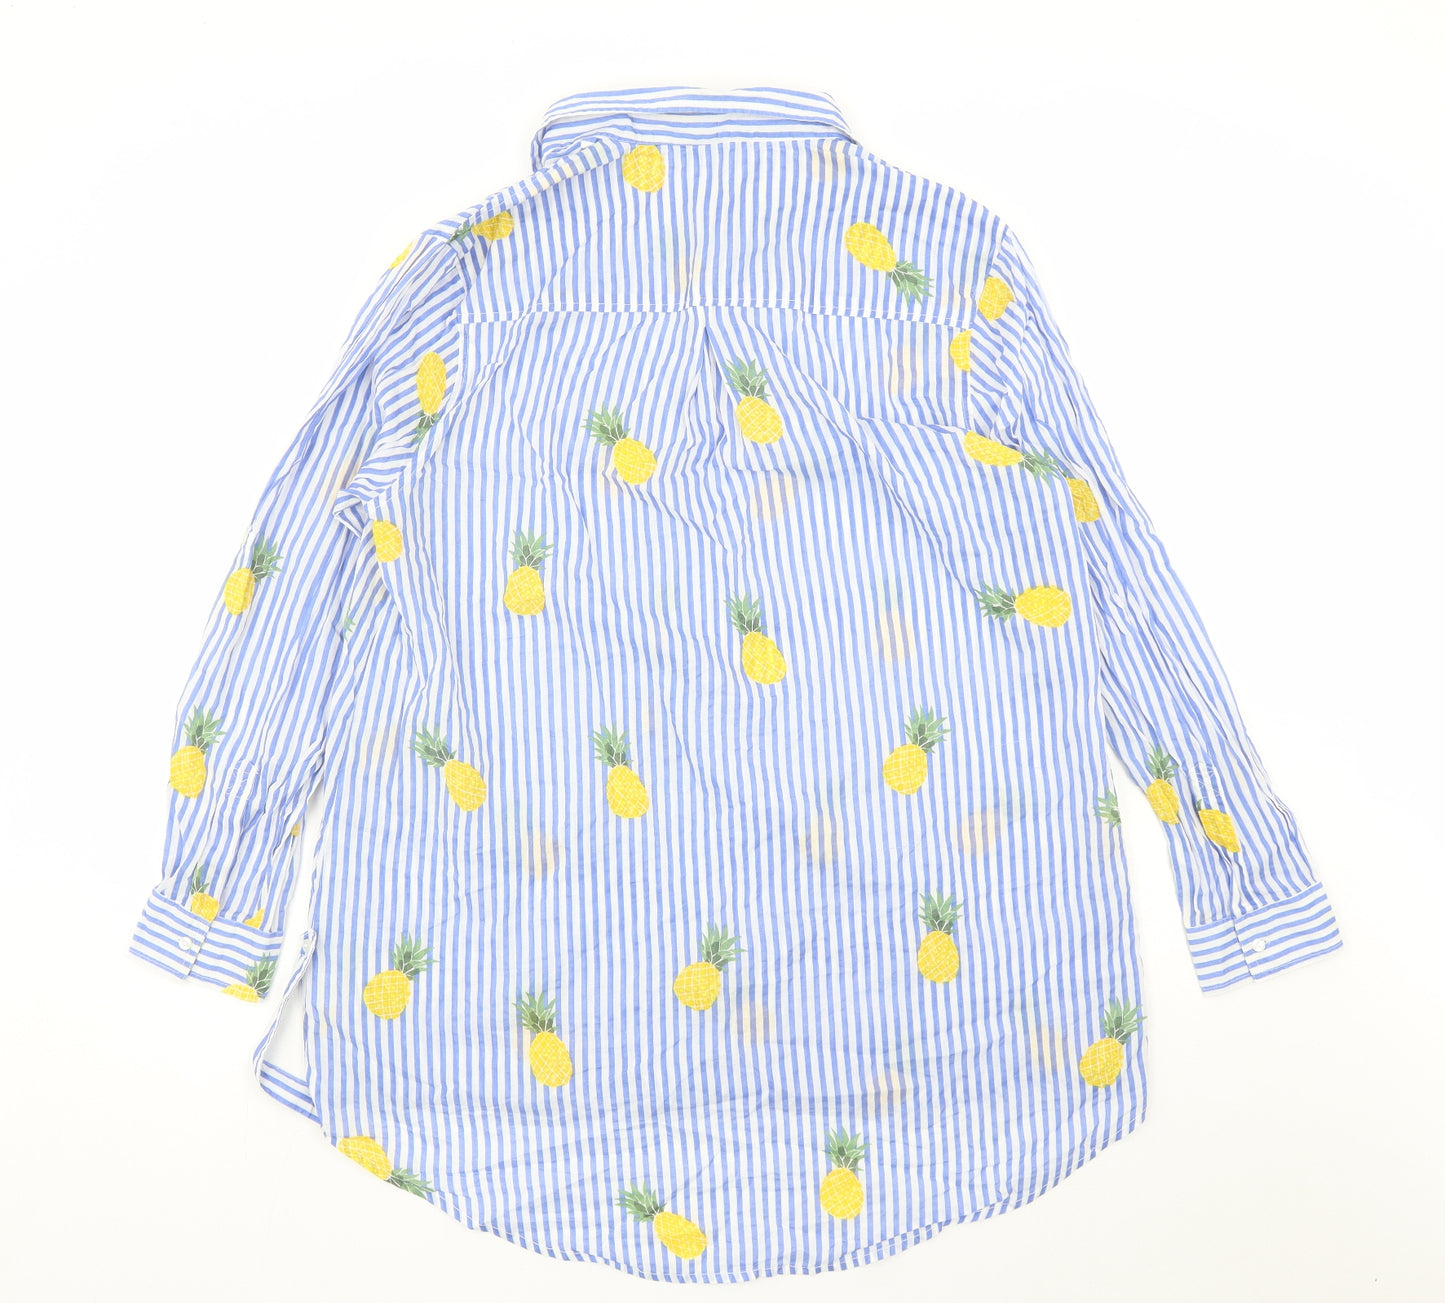 True Decadence Womens Blue Striped Cotton Basic Blouse Size L Collared - Pineapple, Sheer